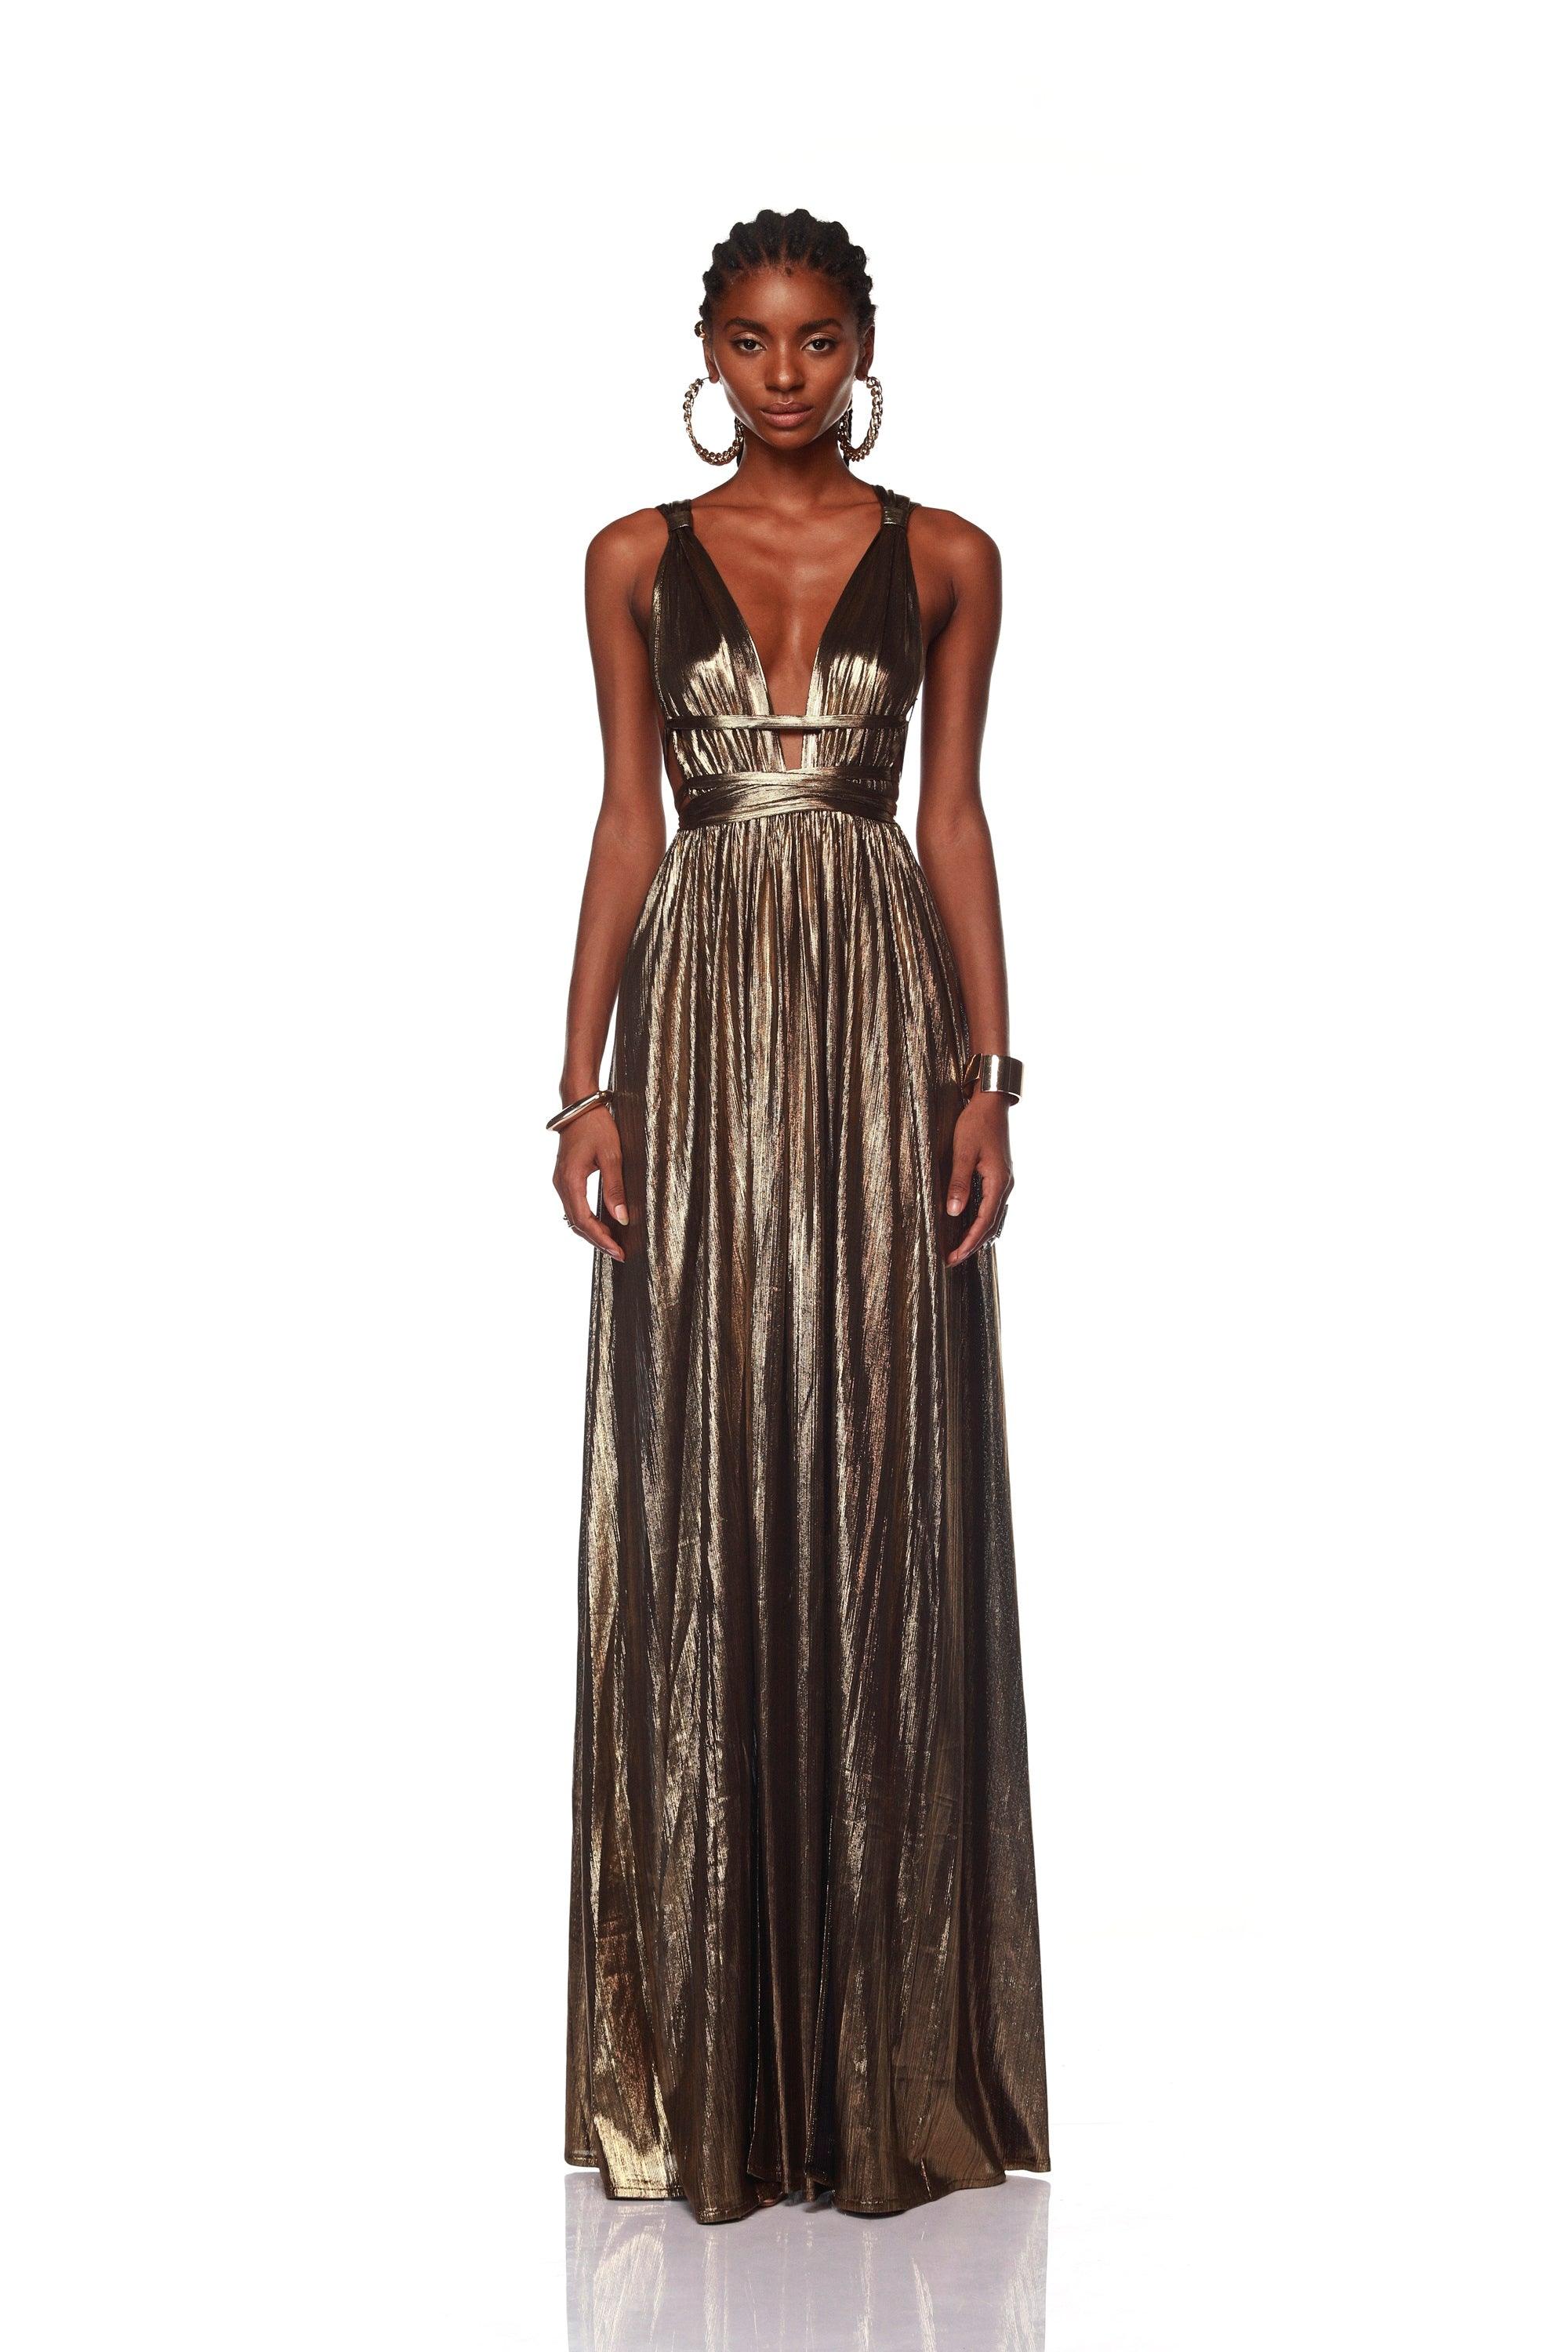 Women's Black Polished & Gold Embroidery Dress - African Clothing Store |  JT Aphrique